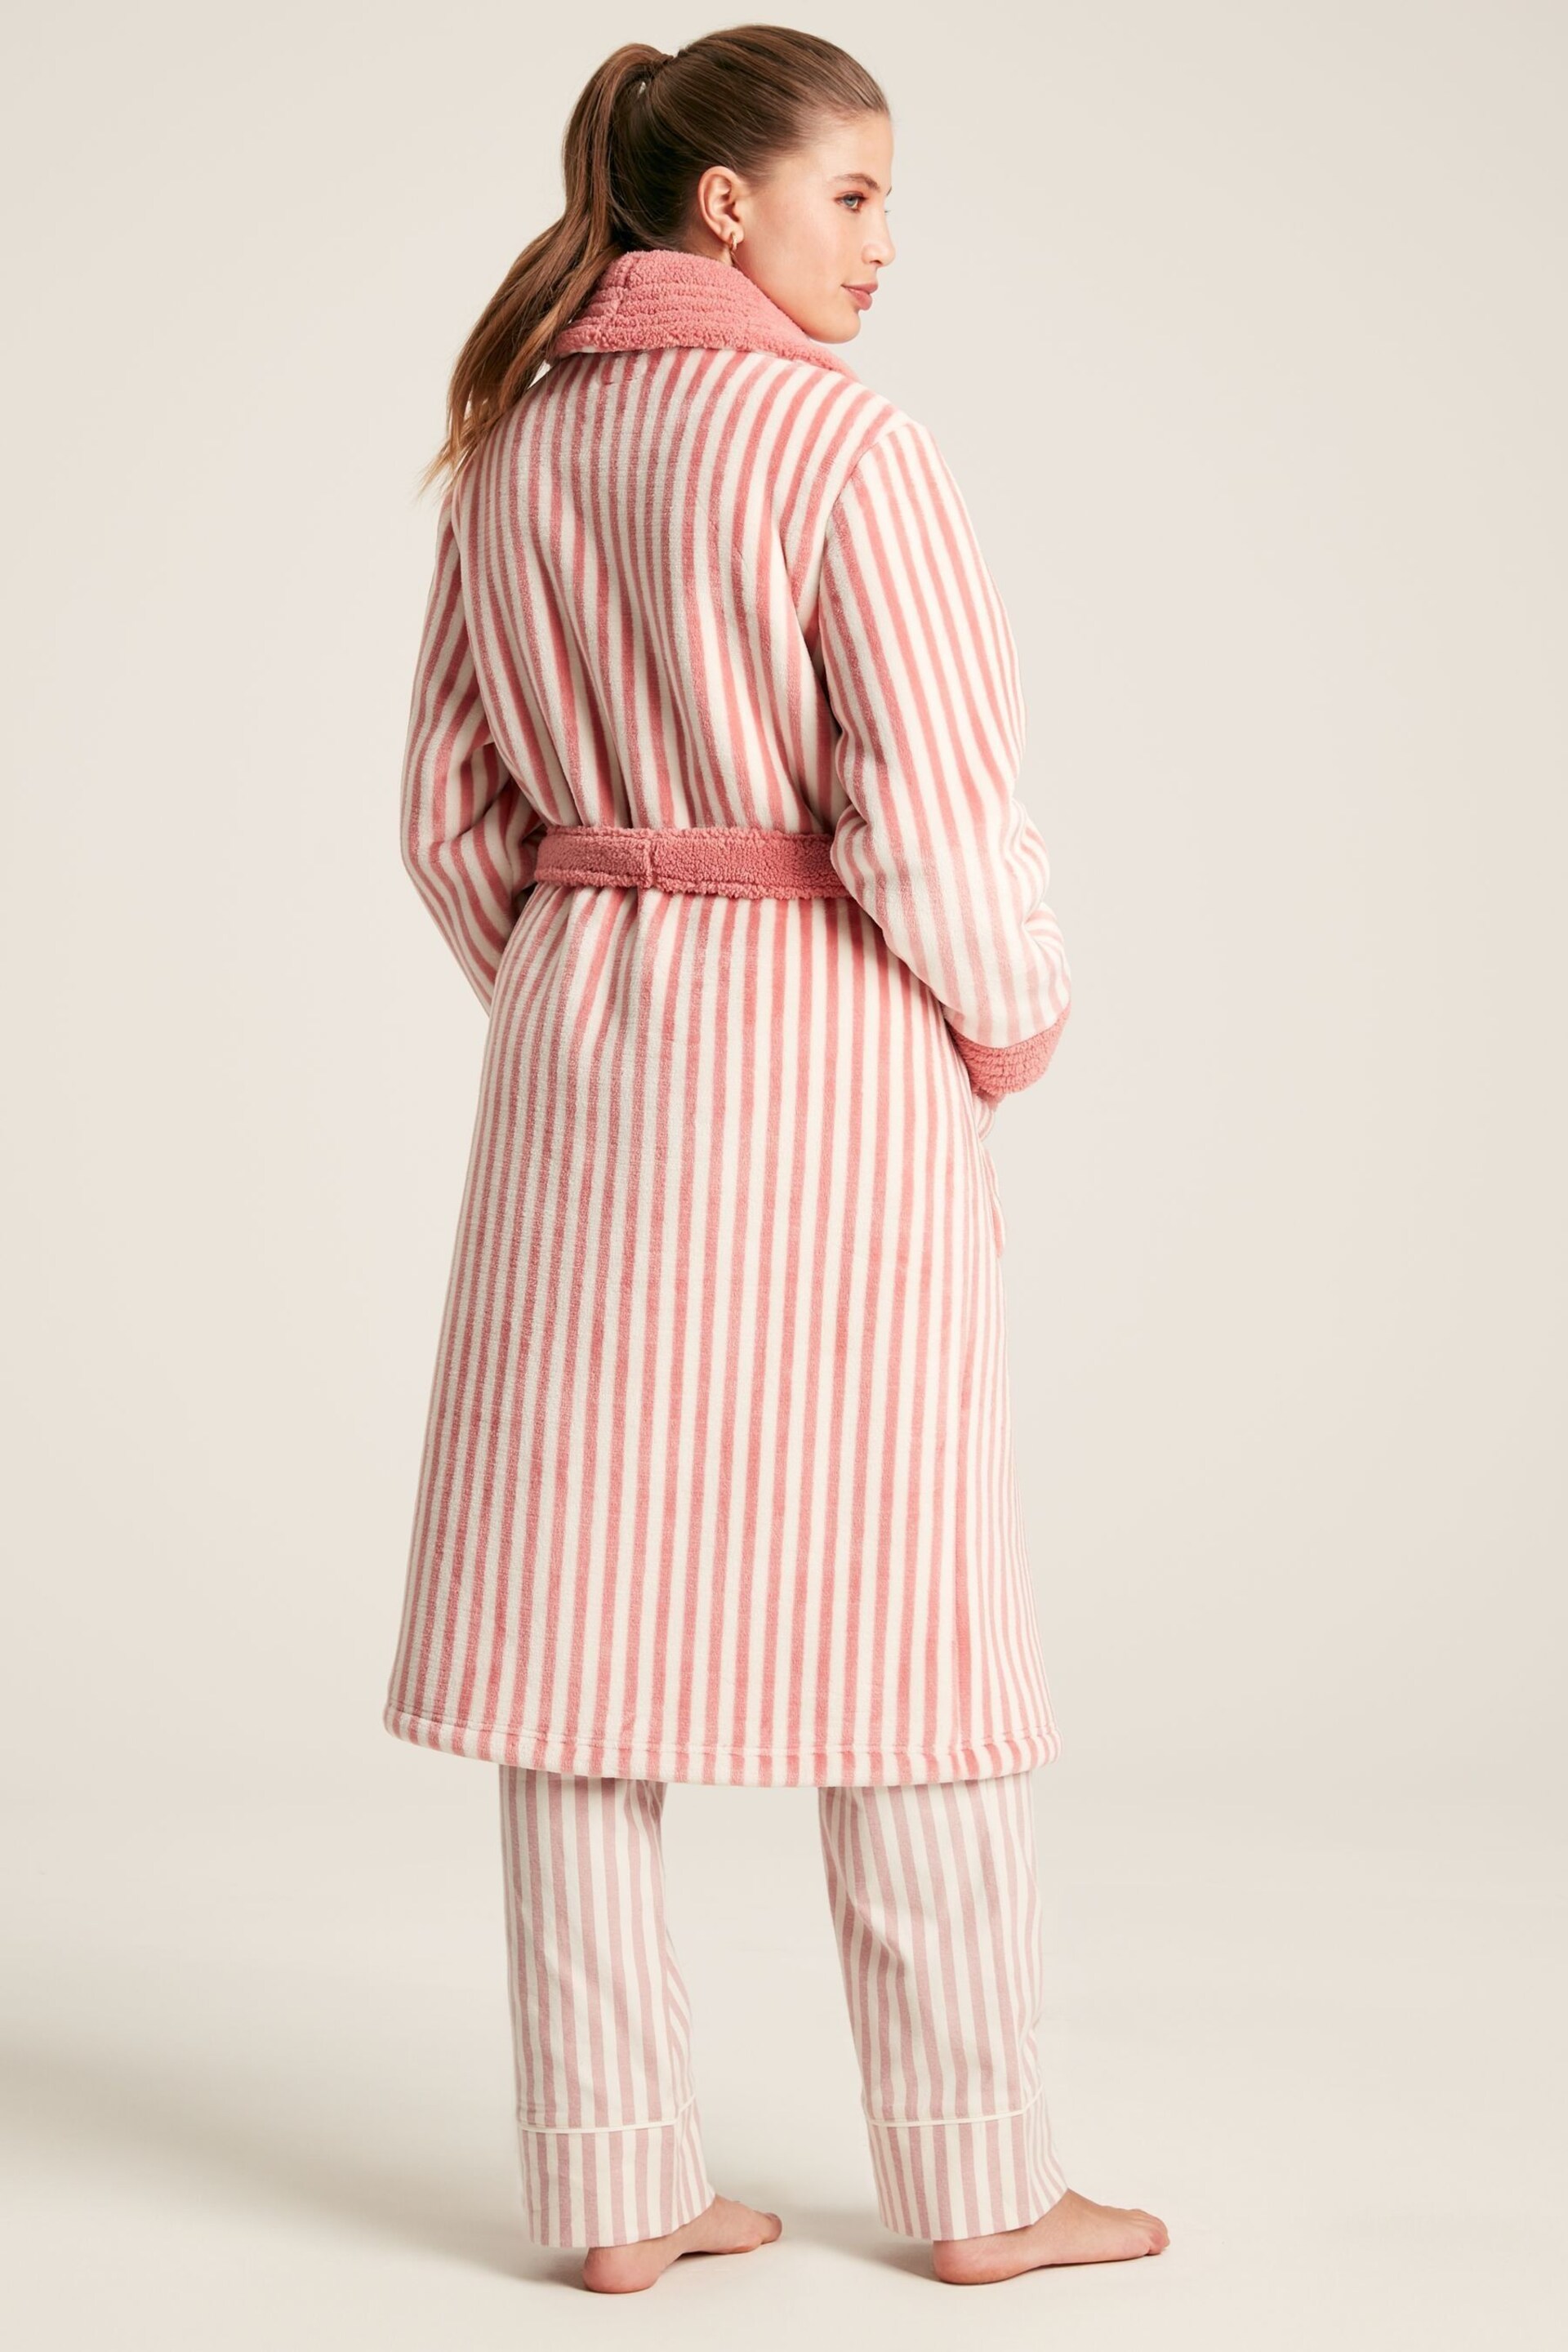 Joules Matilda Pink Fleece Lined Striped Dressing Gown - Image 2 of 6